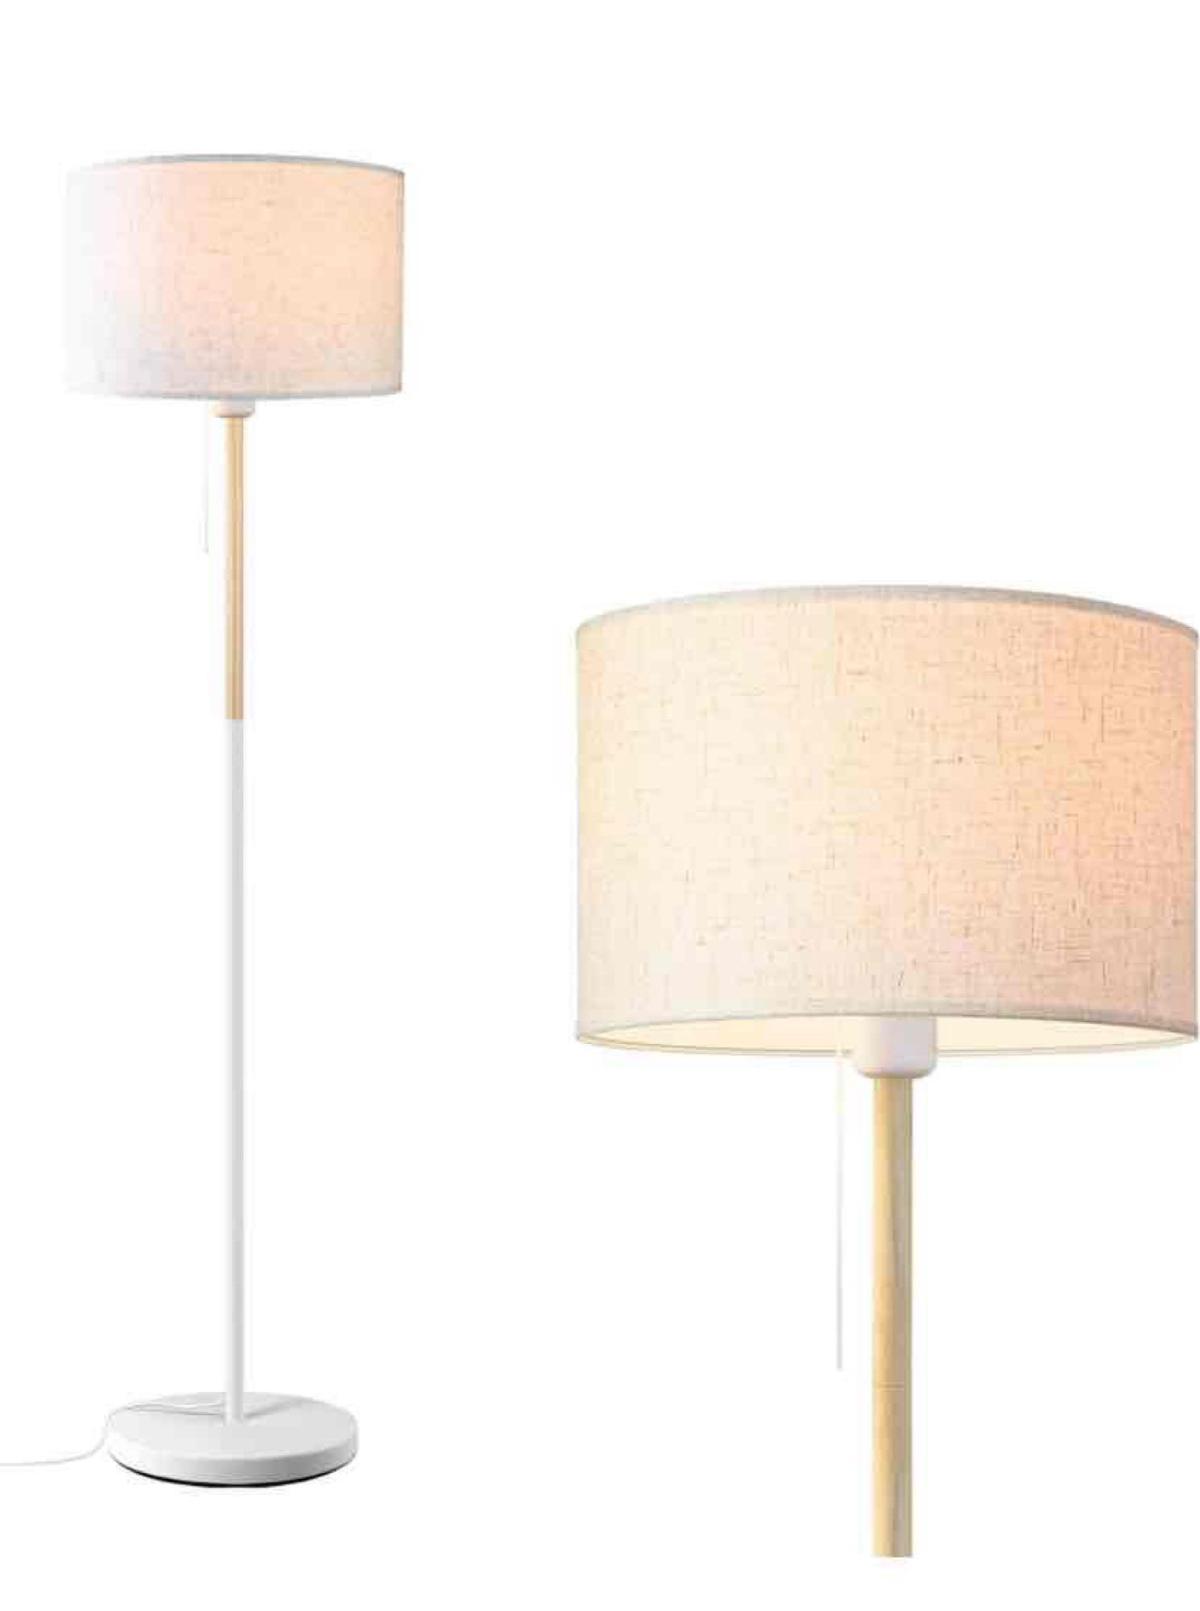 Modern Floor Lamp for Living Room Traditional Farmhouse Floor Lamps Mid-Century Pole Lamp with Linen